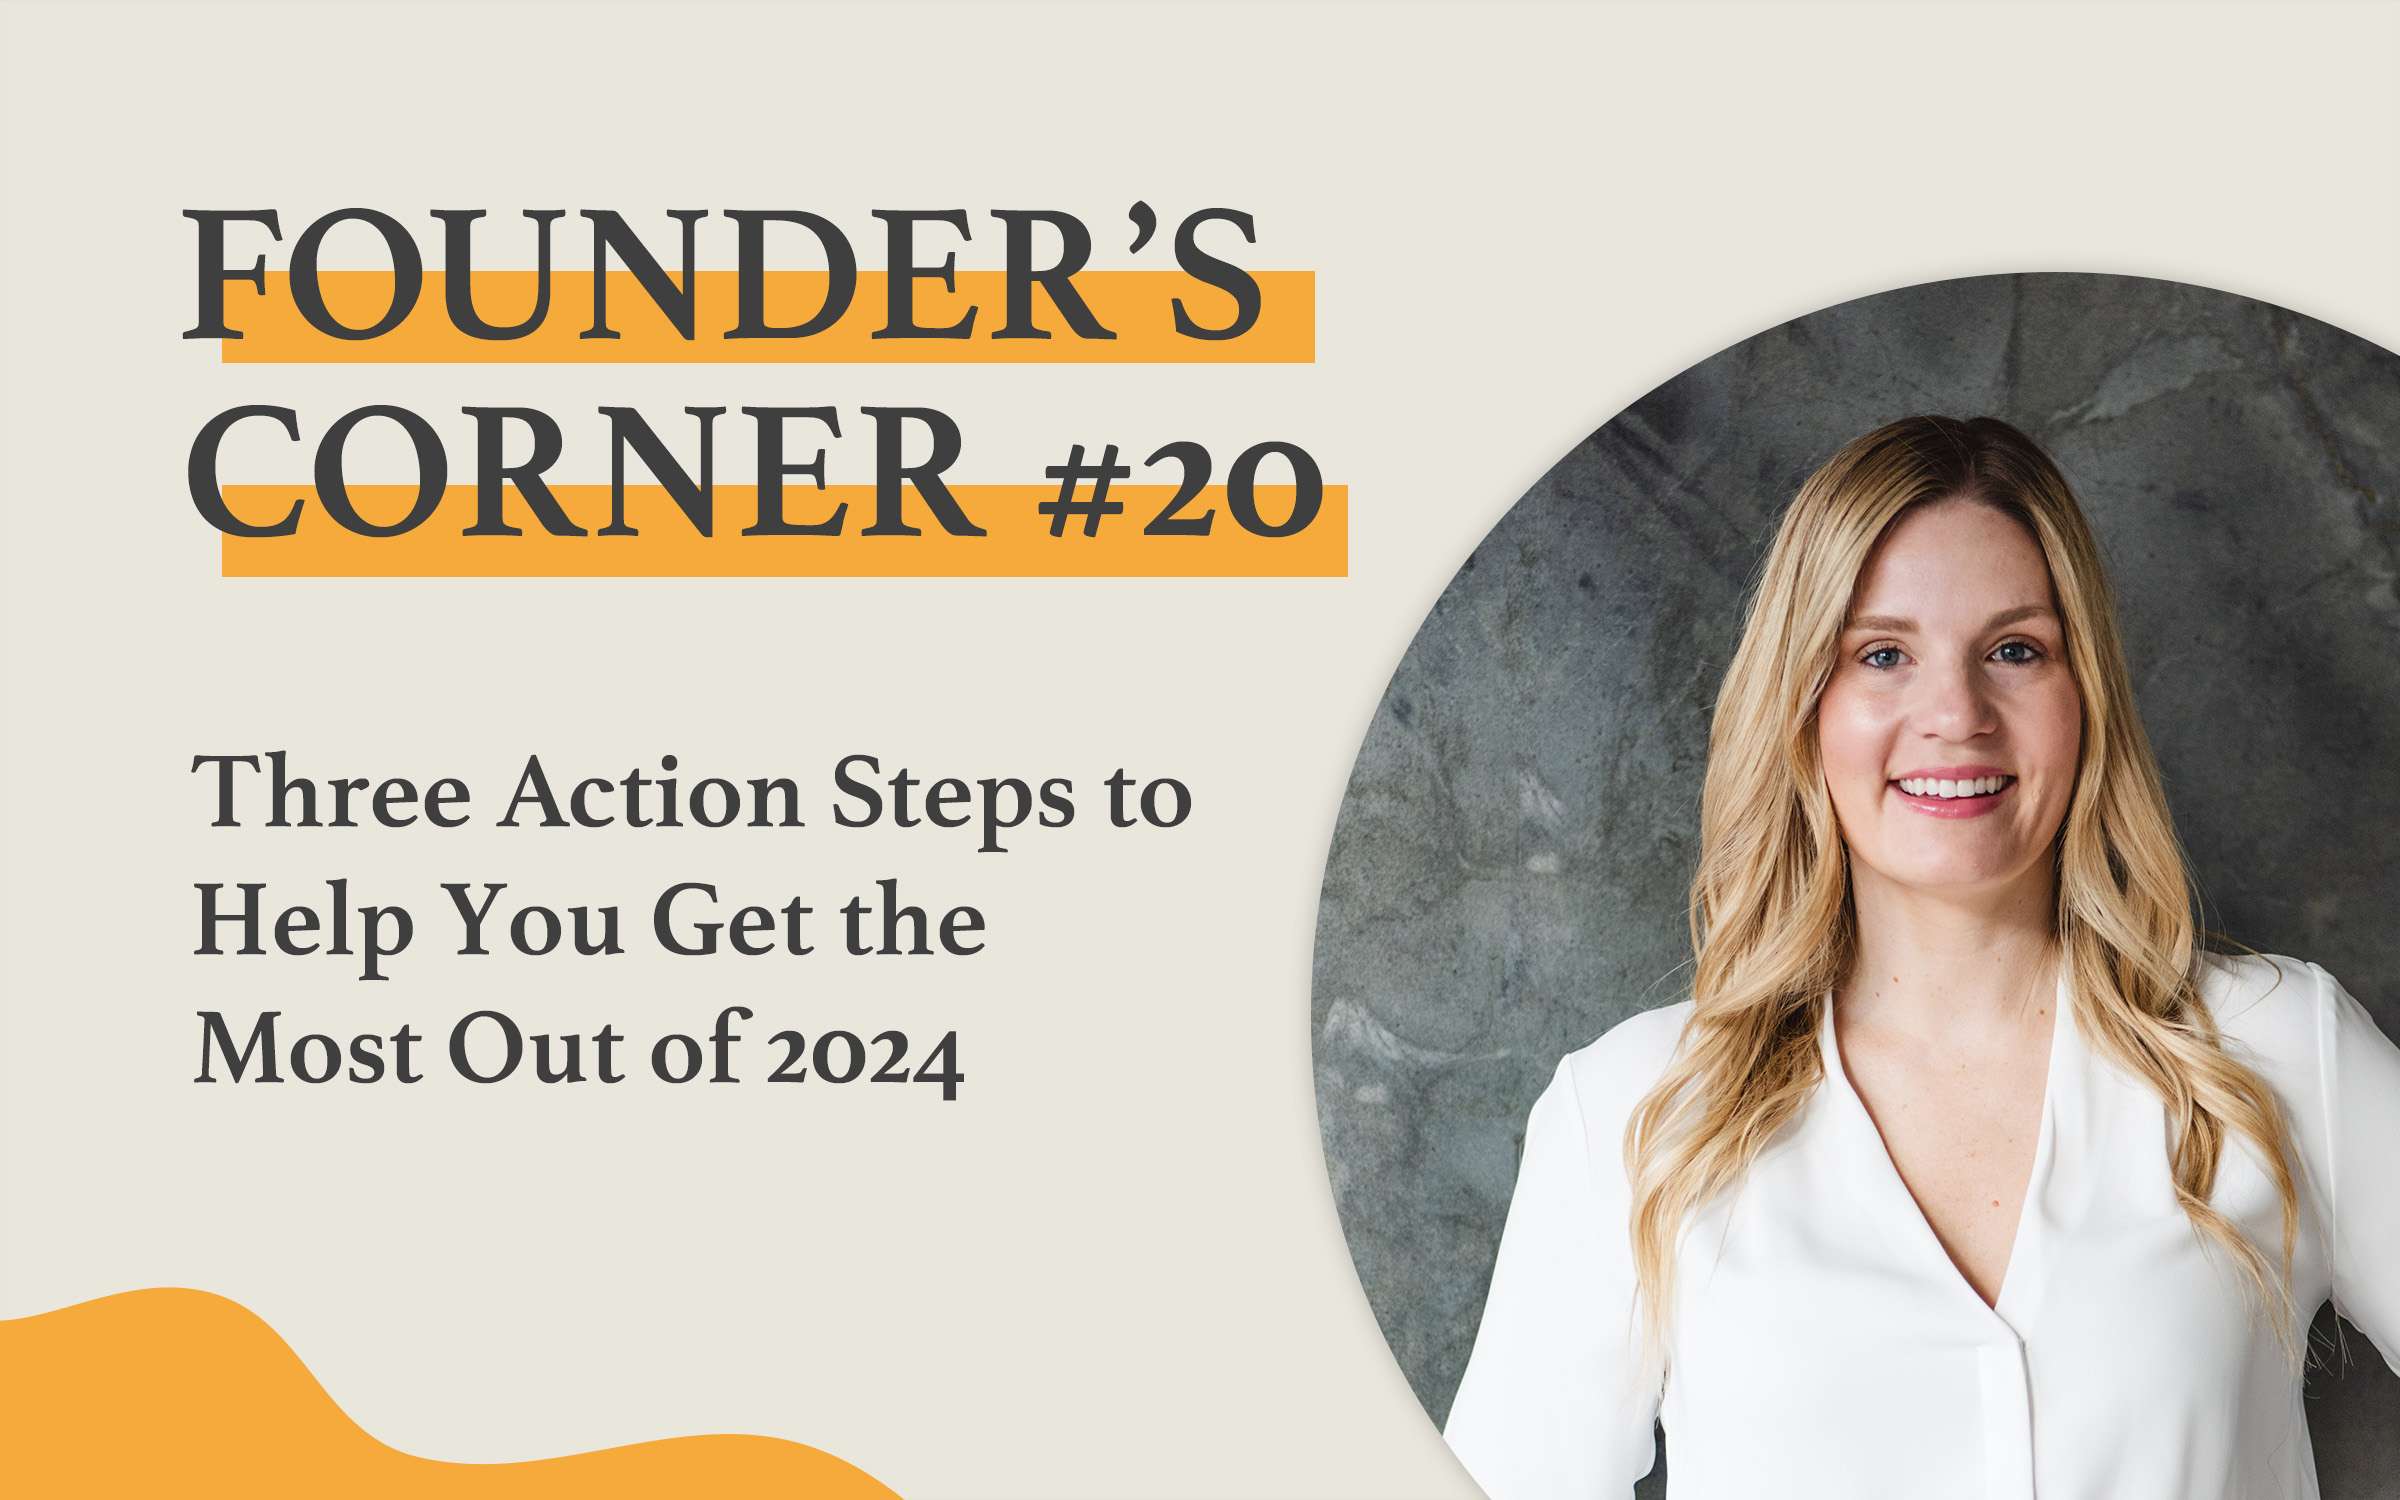 3 Action Steps to Help You Get the Most Out of 2024